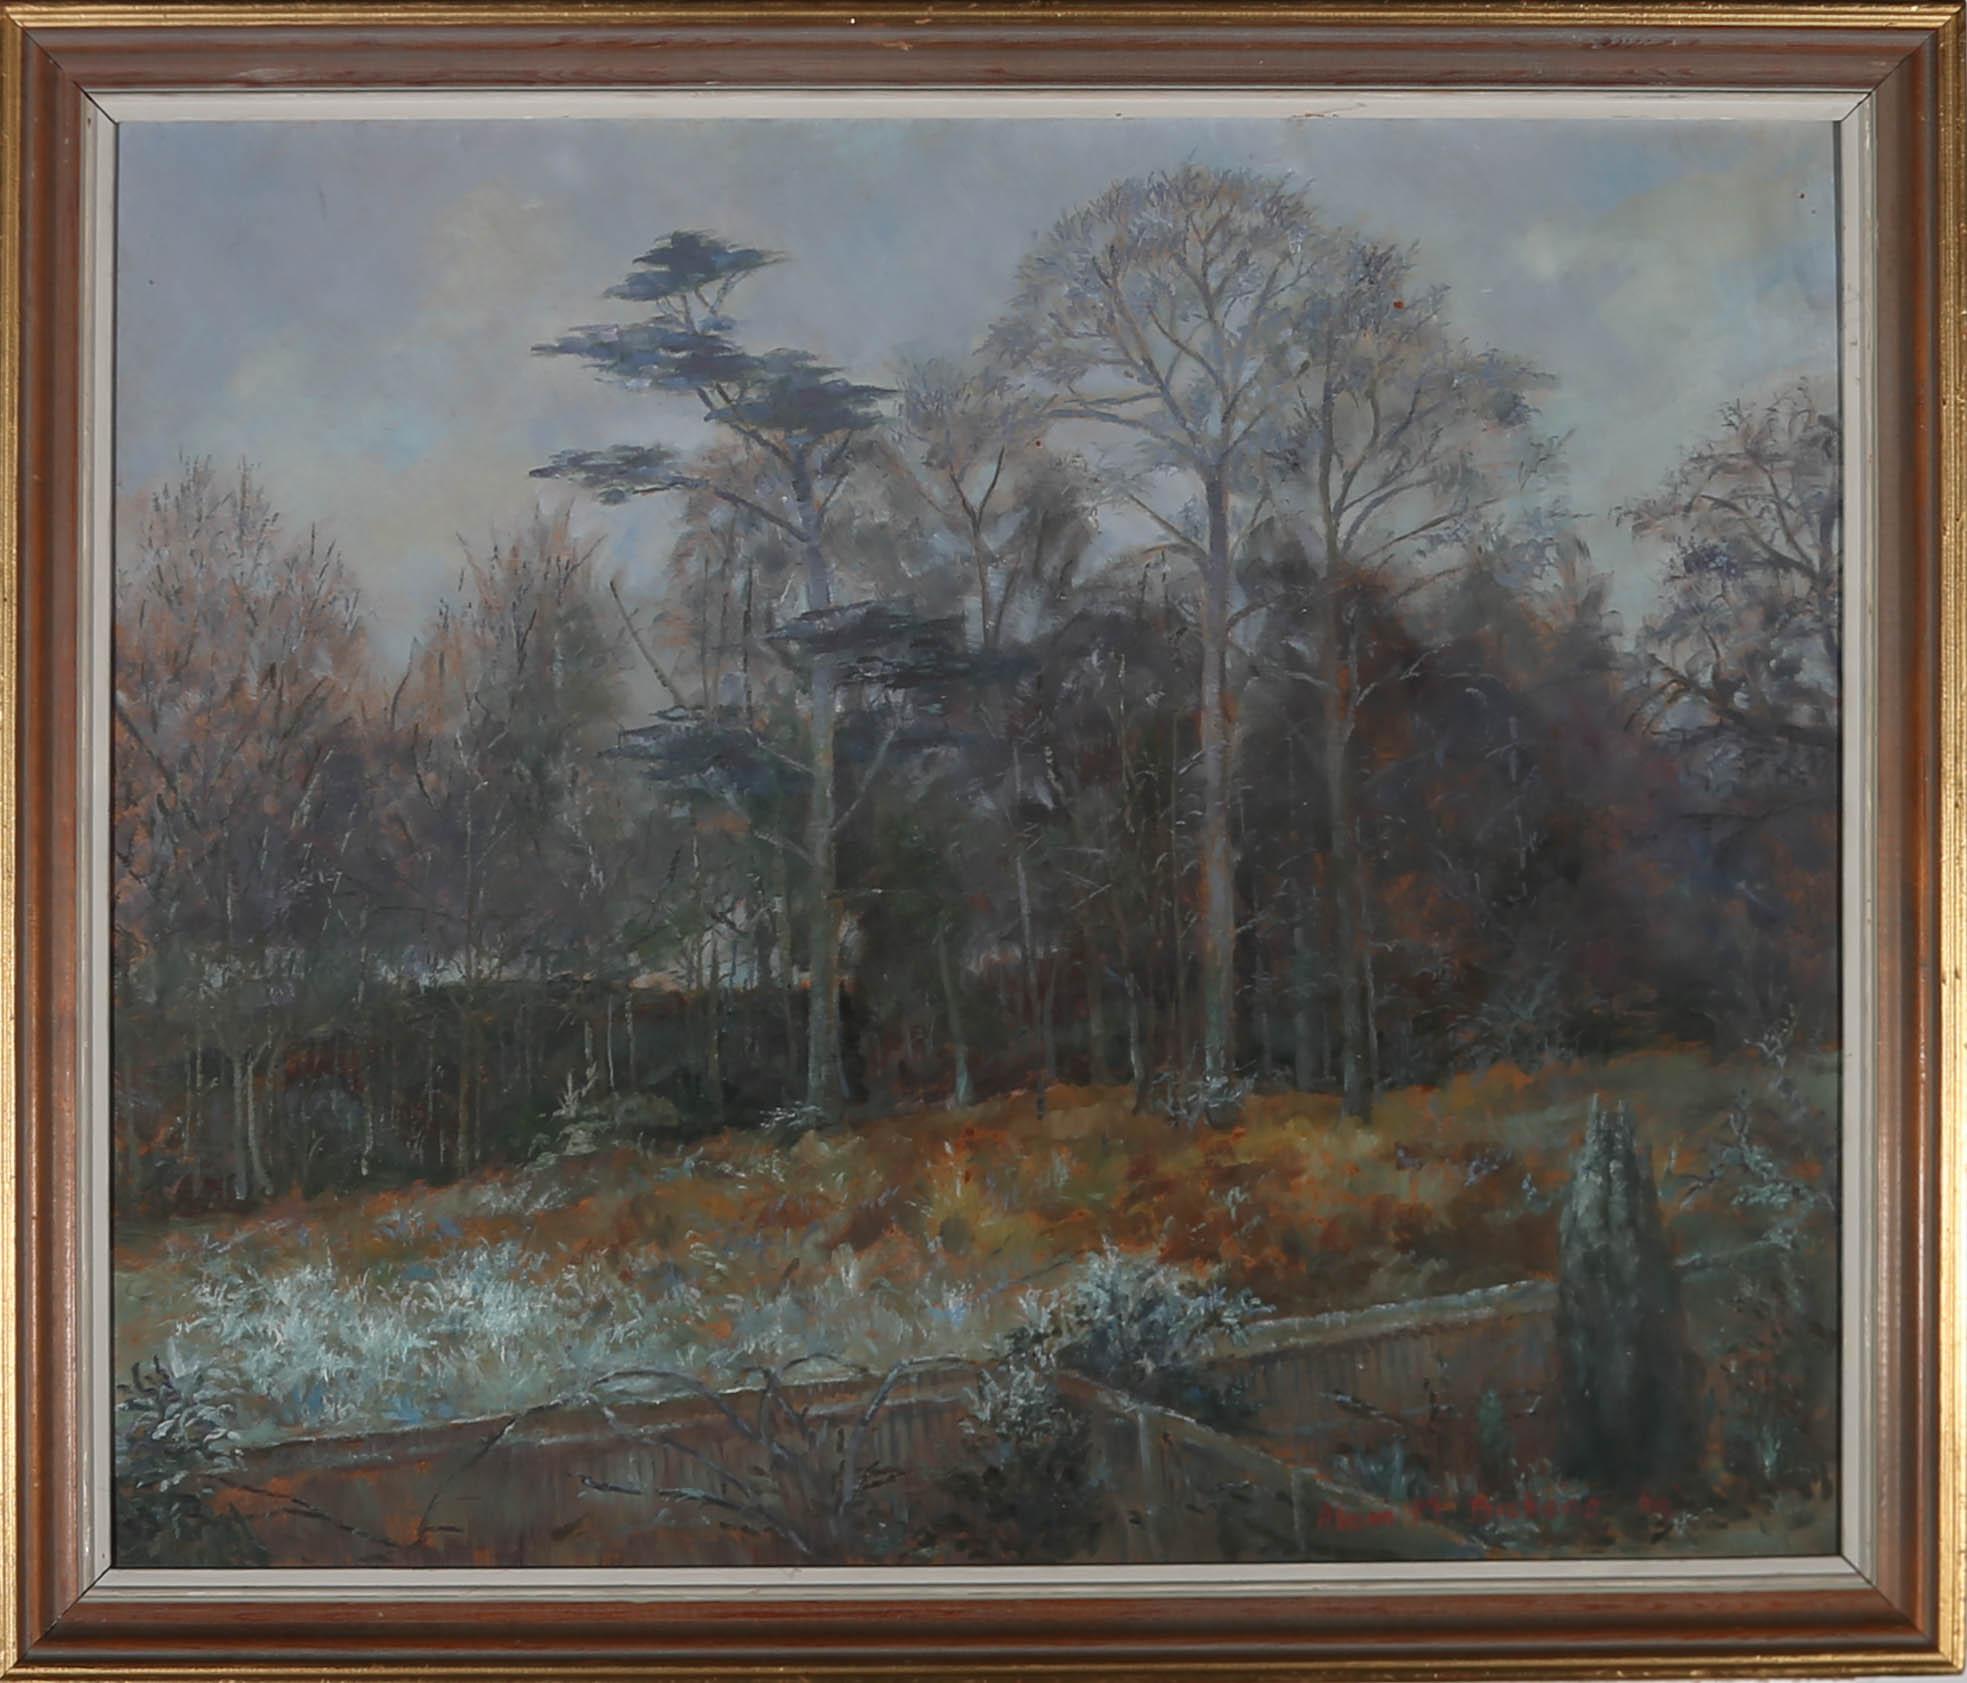 A very fine landscape by the British artist Alison M. Dickens. Here she has captured the edge of woodland on a frosty morning as the sun rises in the distance. Well presented in a gilt effect frame. Signed and dated. On board.








